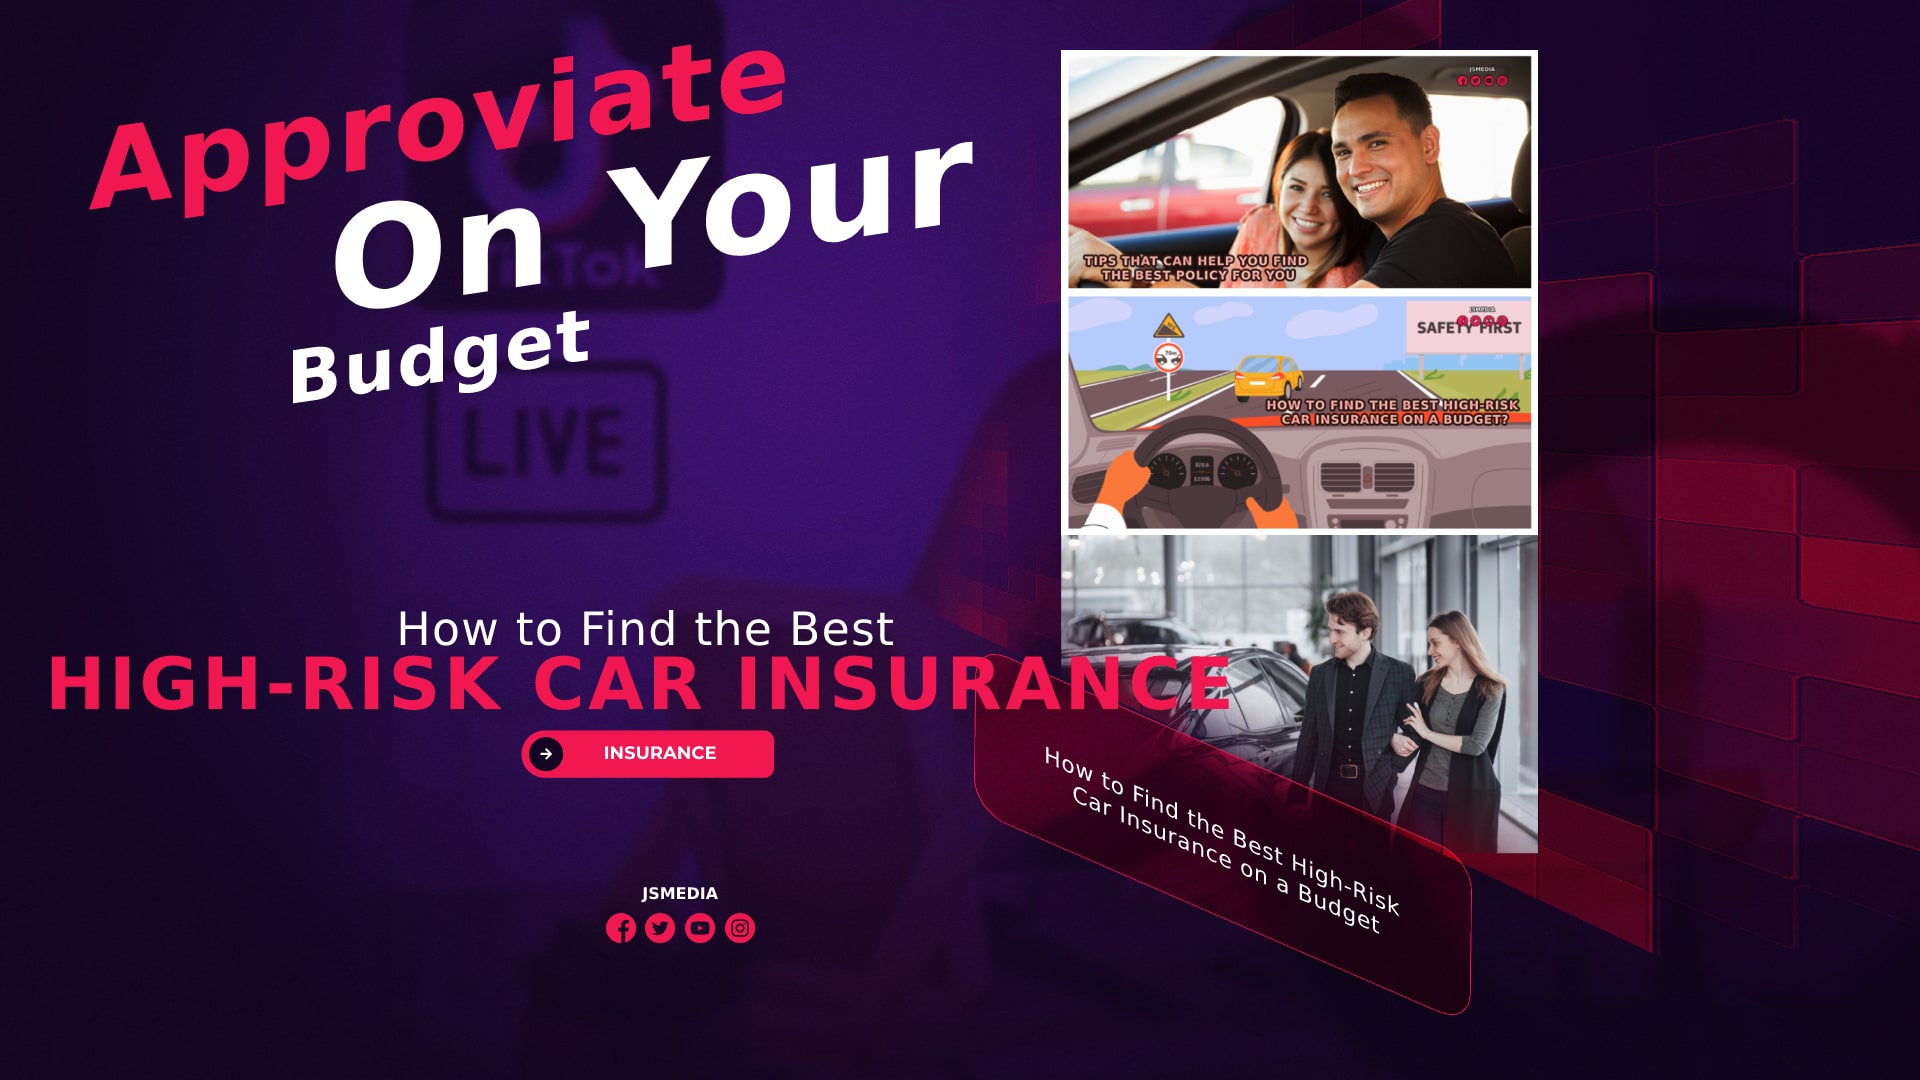 Auto Insurance - How to Find the Best High-Risk Car Insurance on a Budget